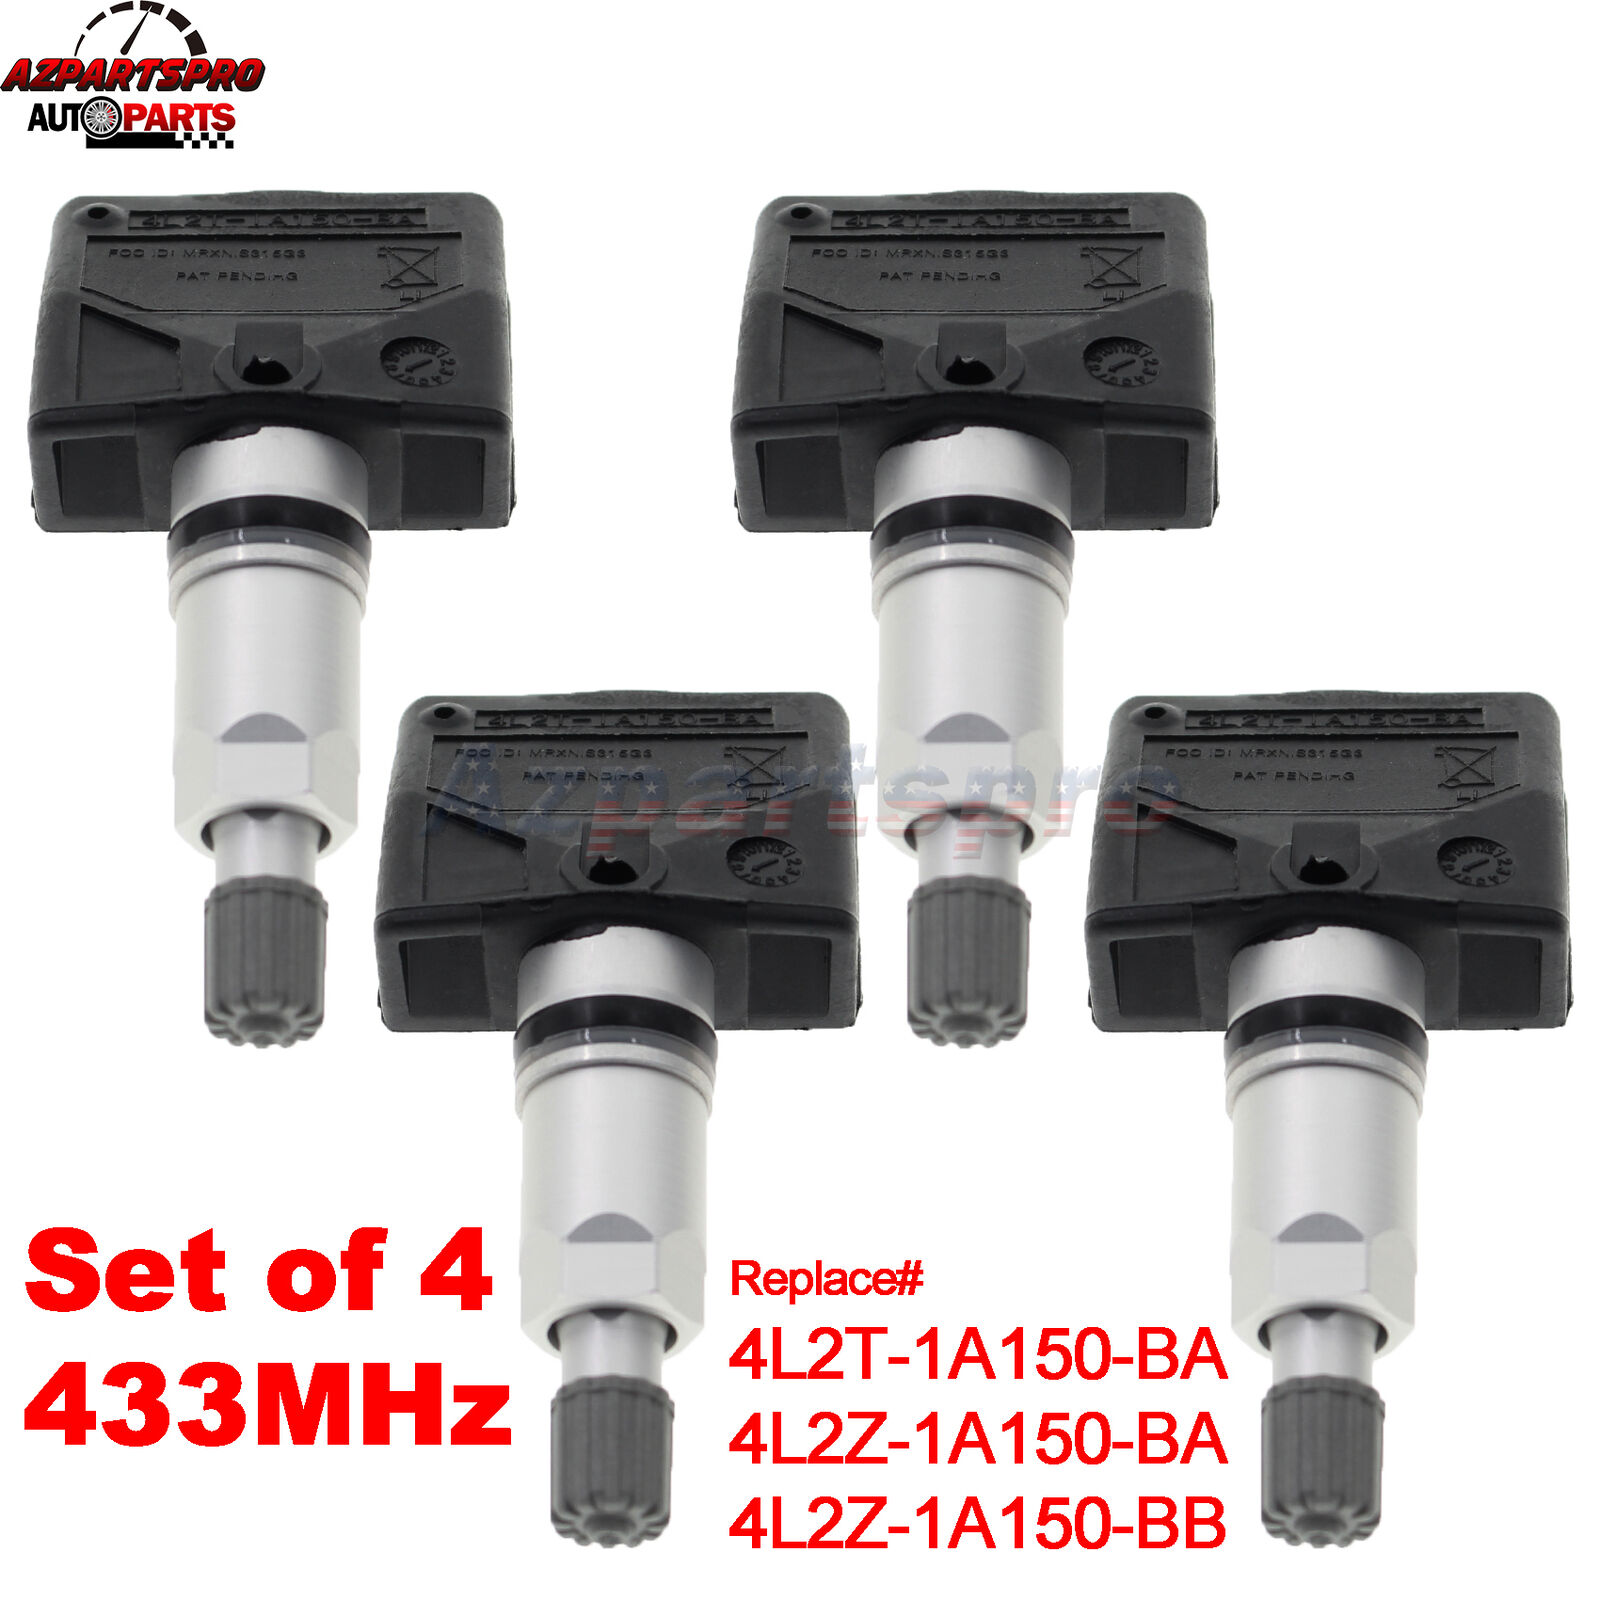 4PCS TPMS Tire Pressure Monitor Sensor For 2003 2004 2005 2006 Ford Expedition